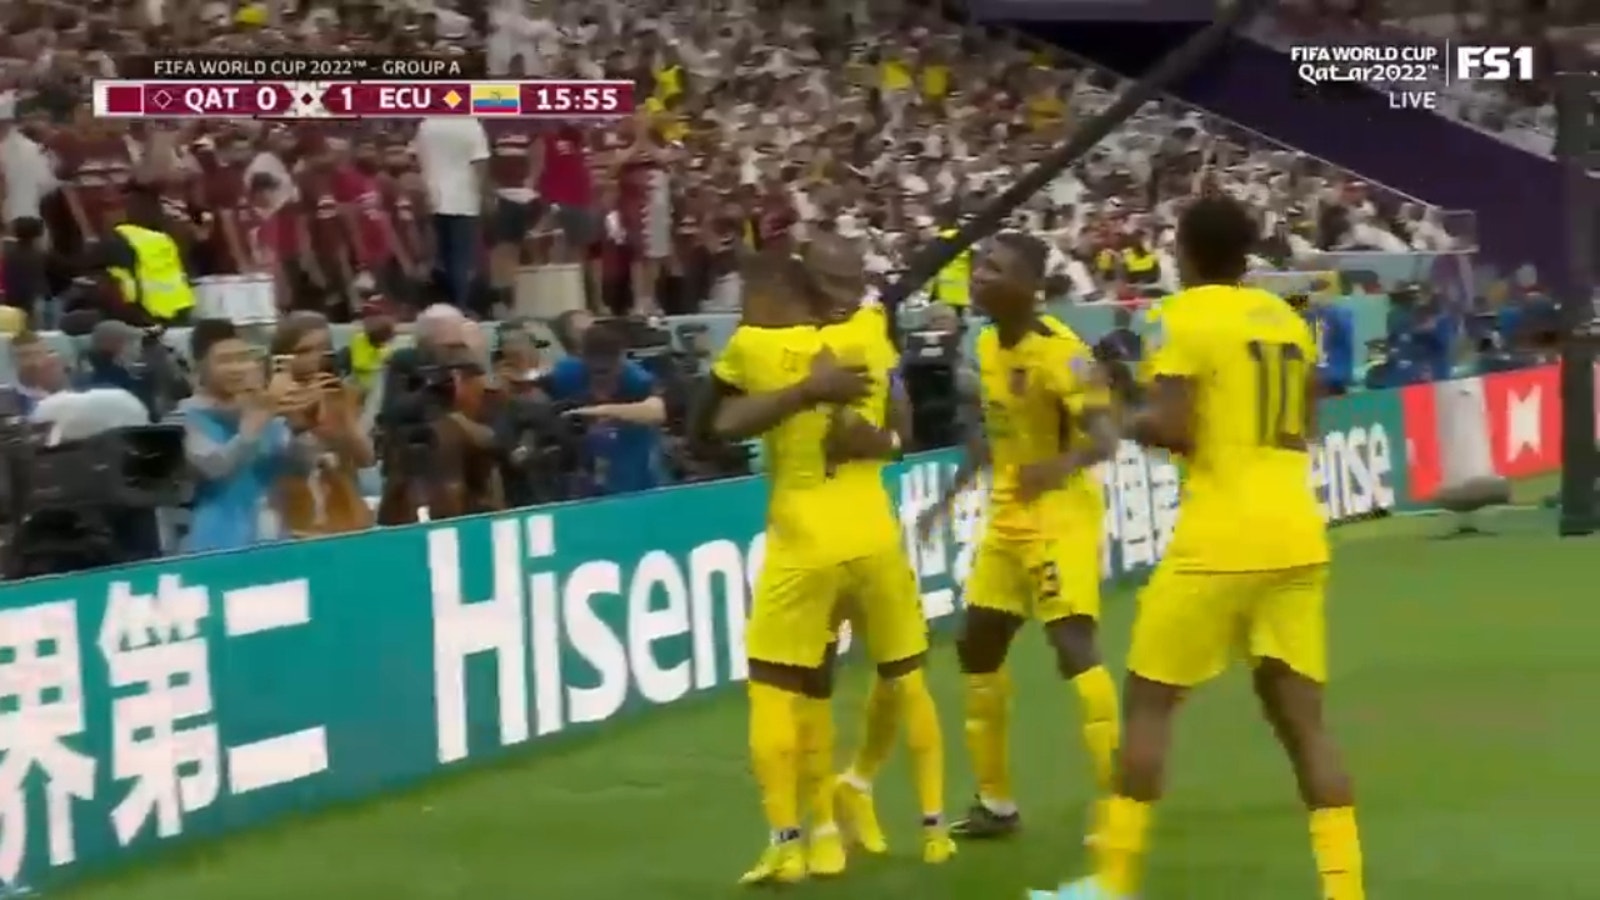 Ener Valencia of Ecuador is fouled in the box and scores a PK vs Qatar 